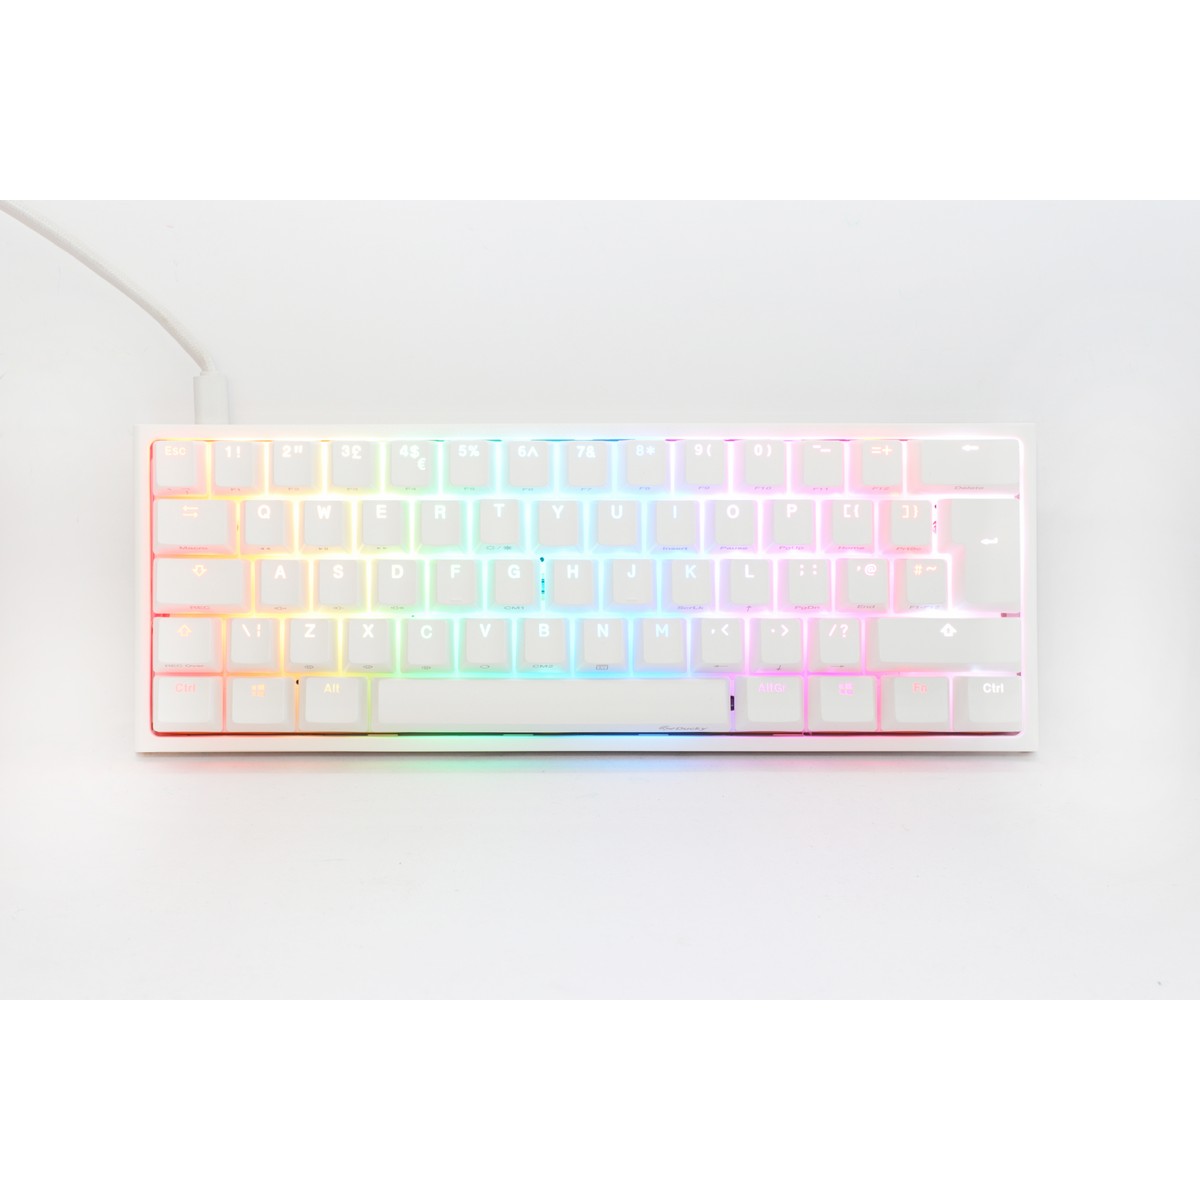 Ducky - Ducky One 2 Pro Mini 60% Mechanical Gaming Keyboard MX Cherry Silent Red Switch White Frame - UK Layout